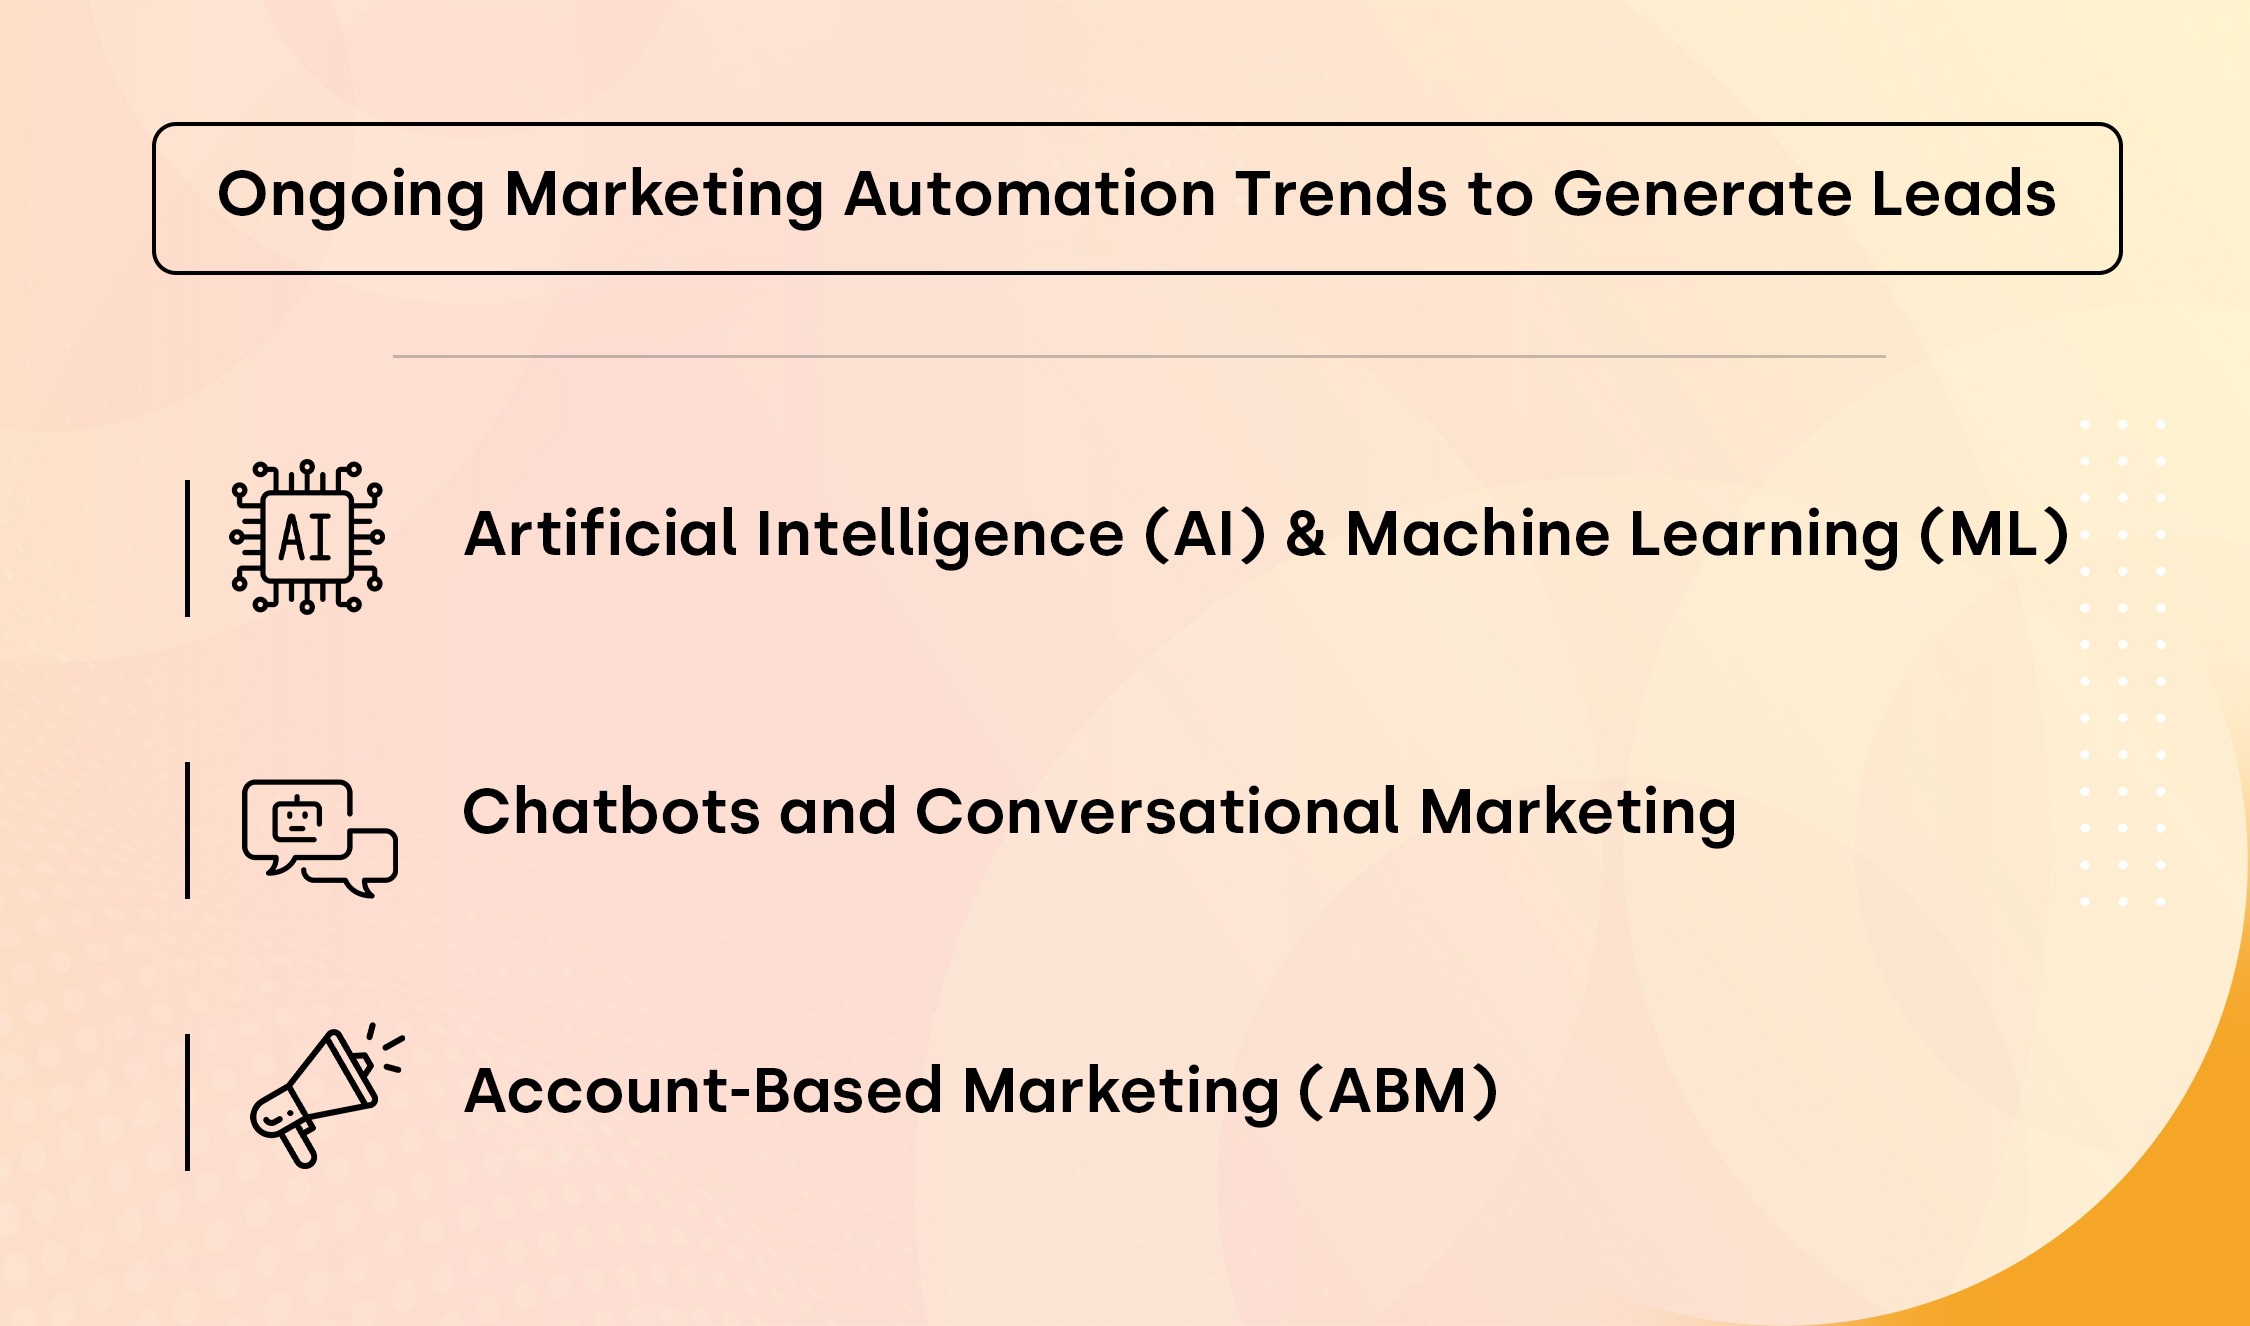 Ongoing Marketing Automation Trends to Generate Leads